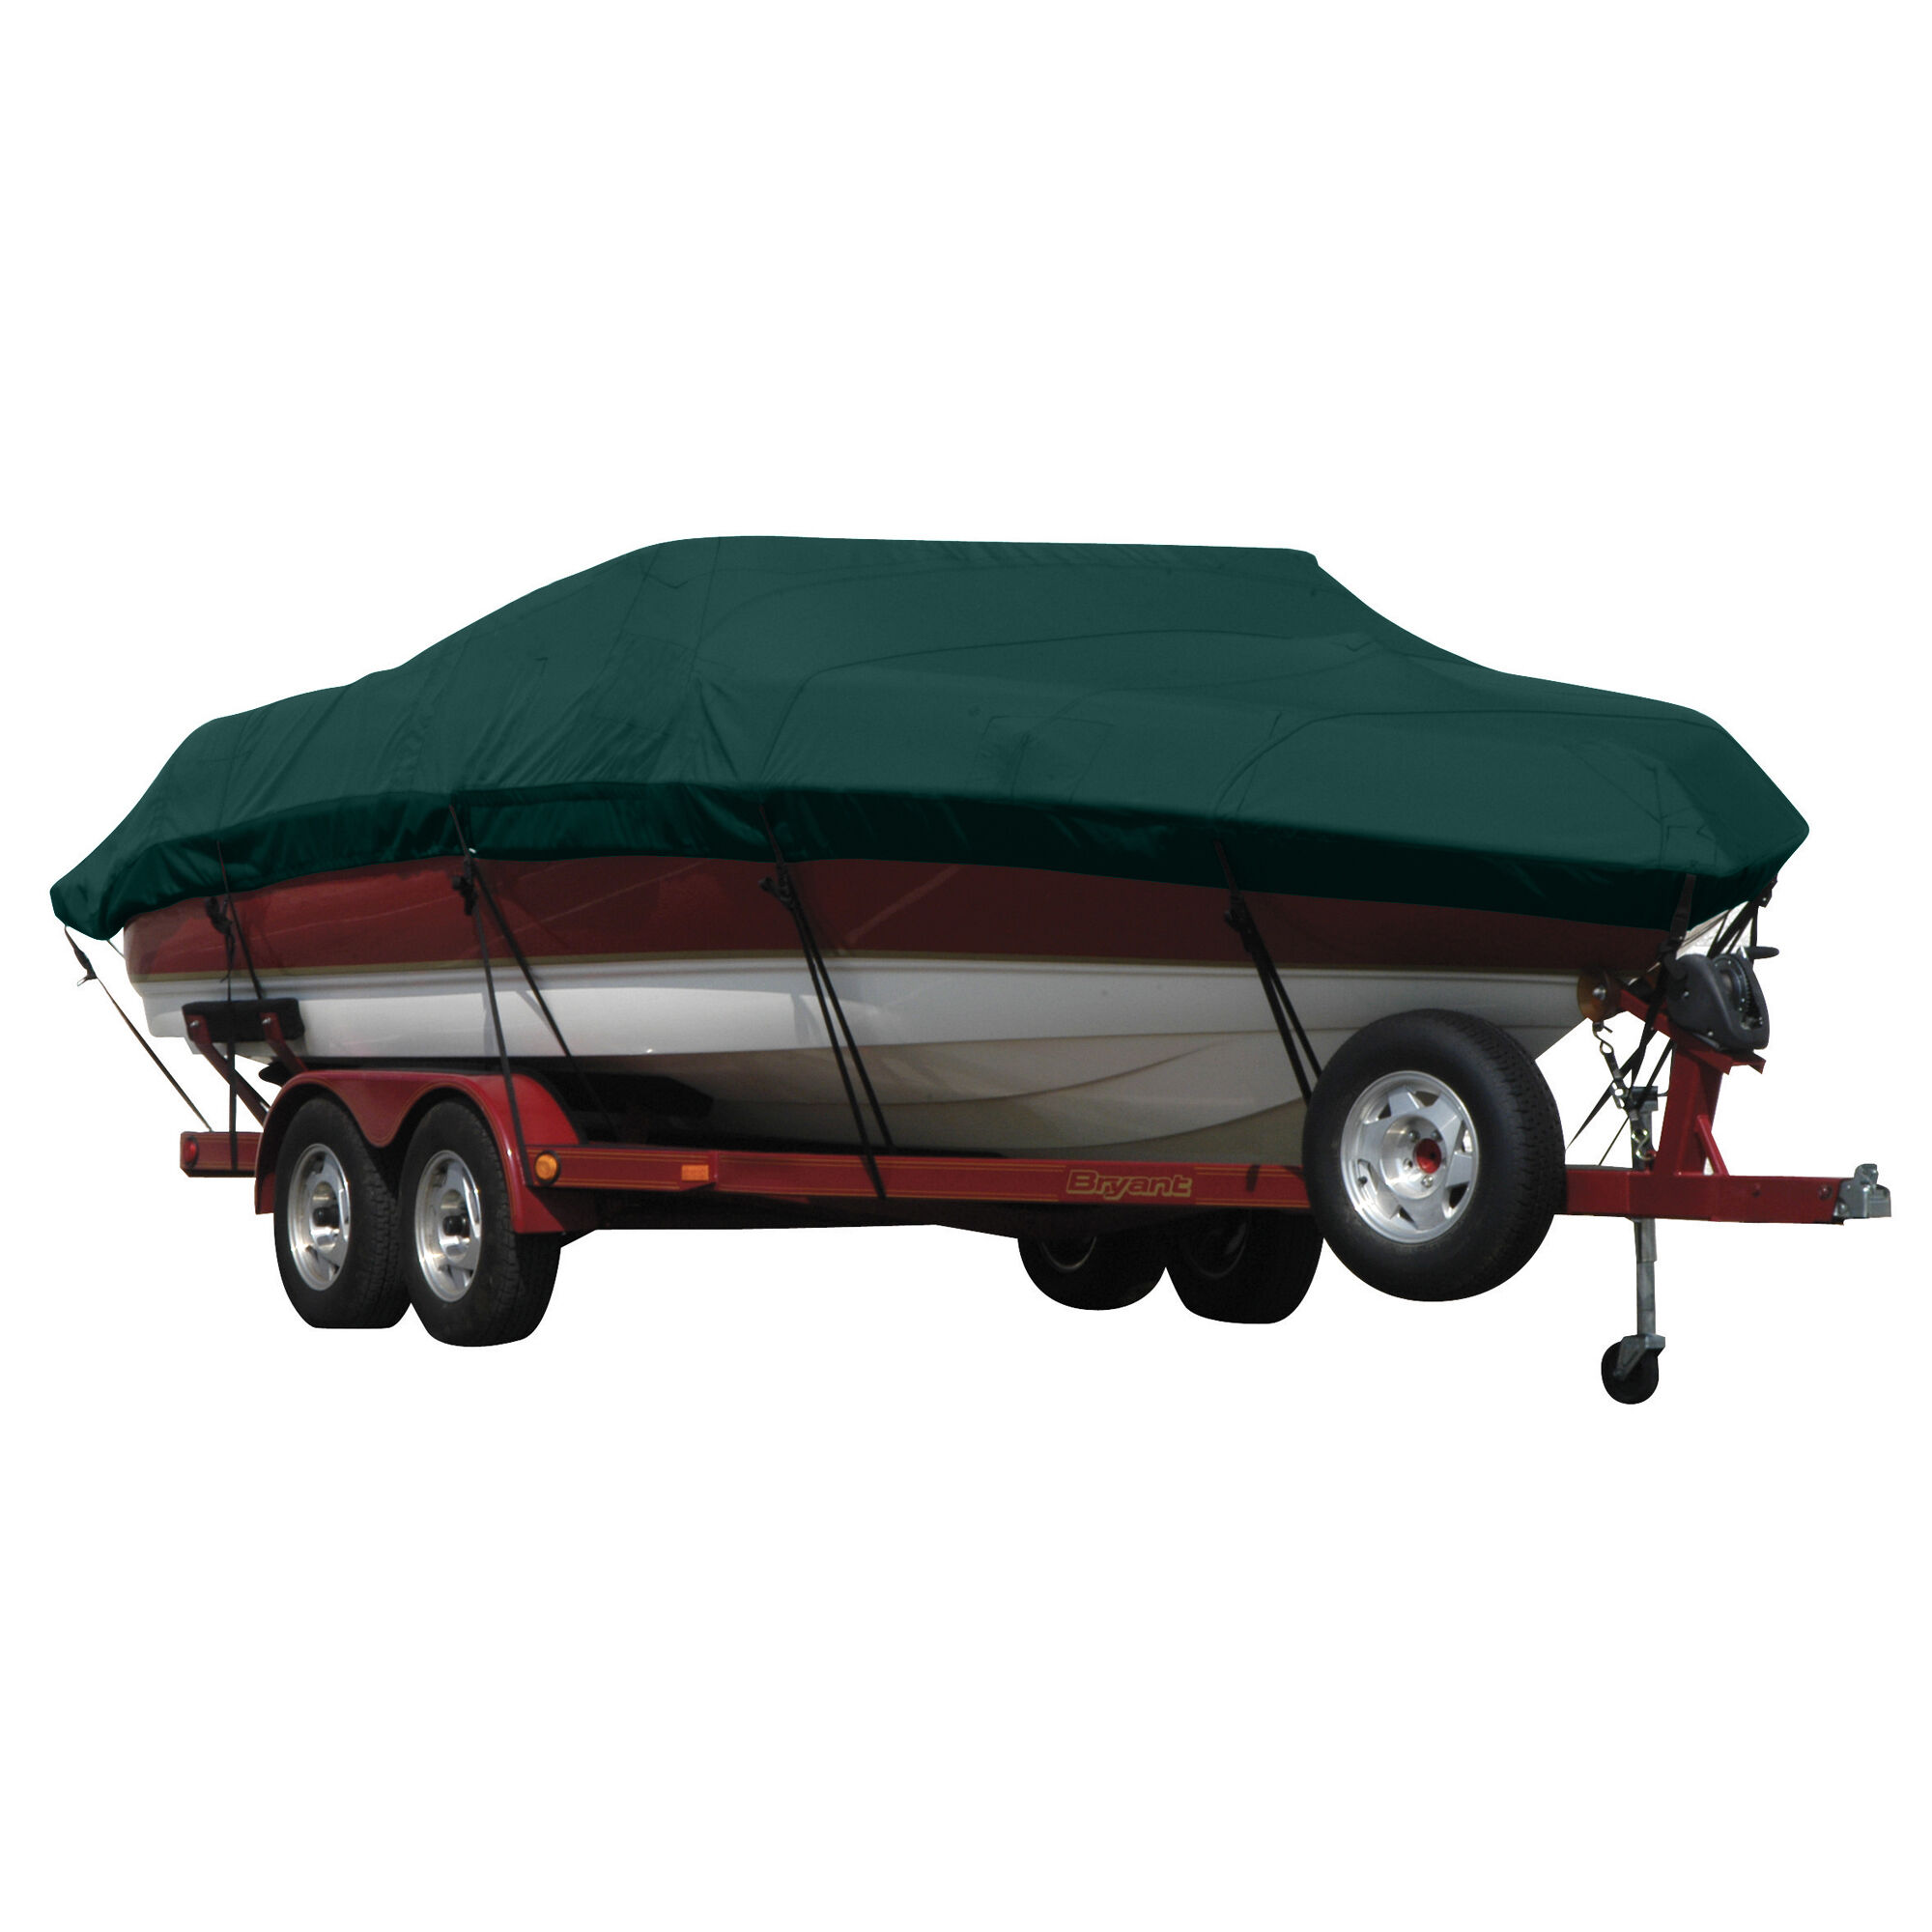 Covermate Exact Fit Sunbrella Boat Cover for Supreme 19 Cs 19 Cs Does Not Cover PLATFORMm. Forest Green